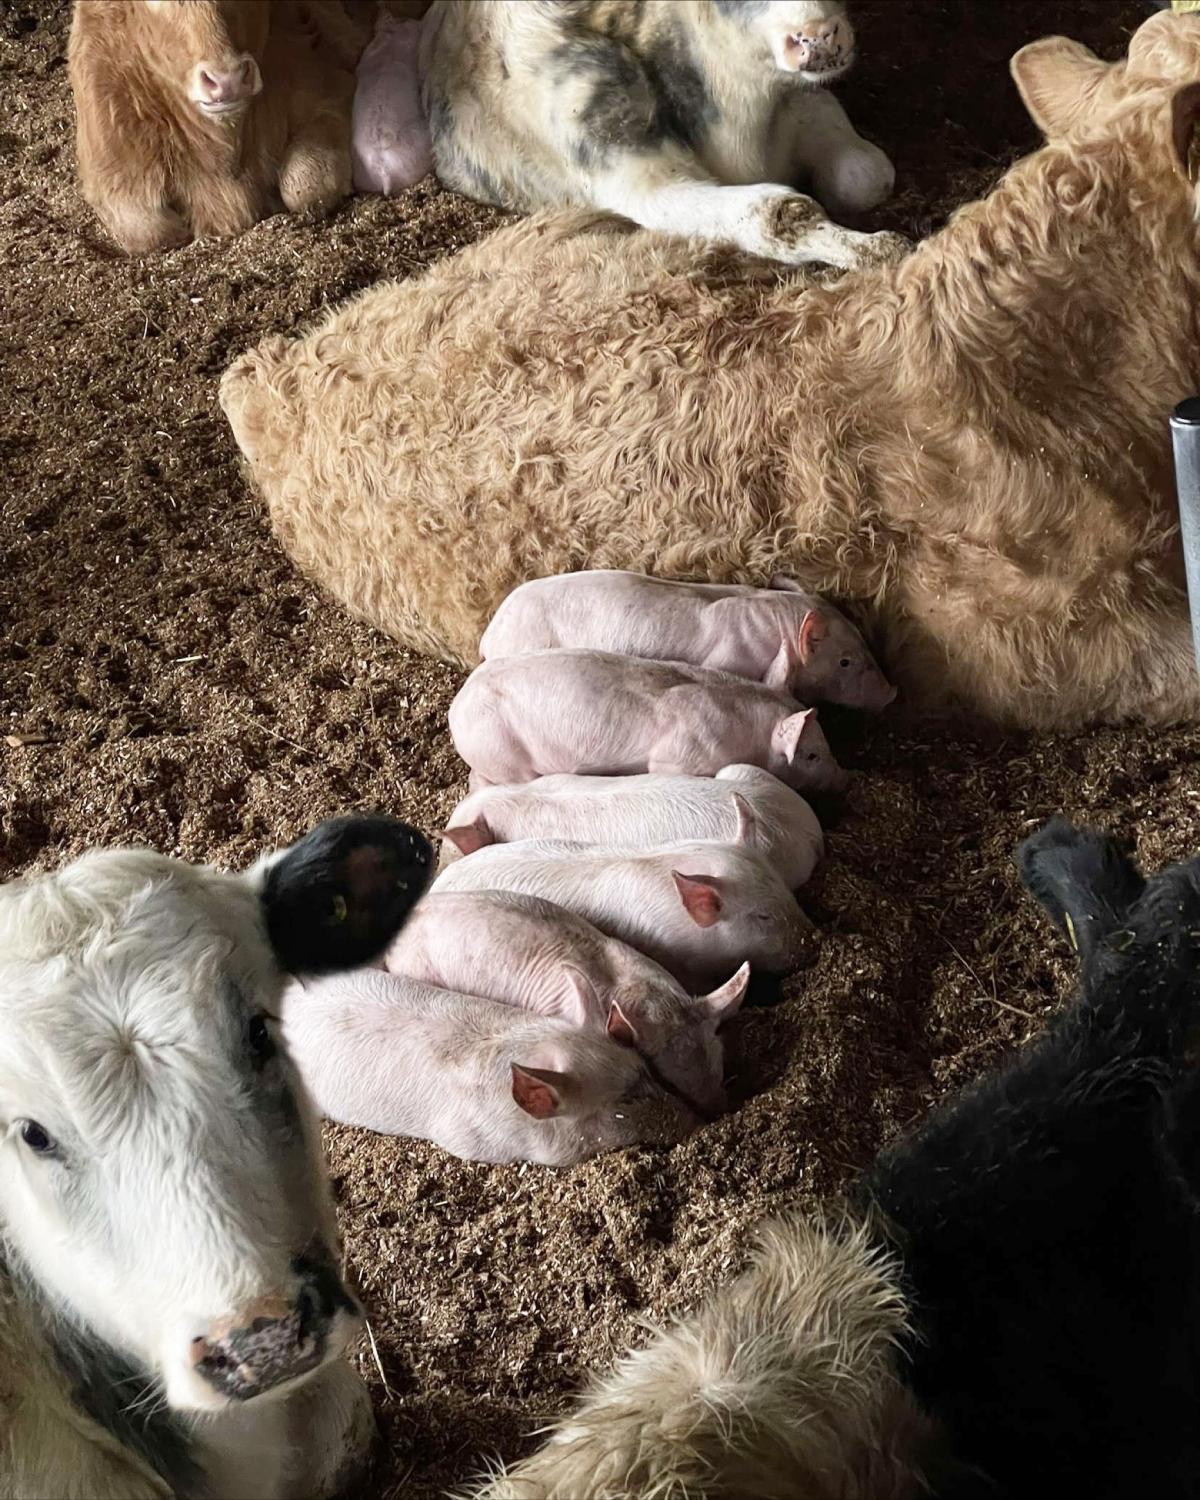 Helen Harrower - Our escapee piglets found a strange but cosy spot to snuggle up.